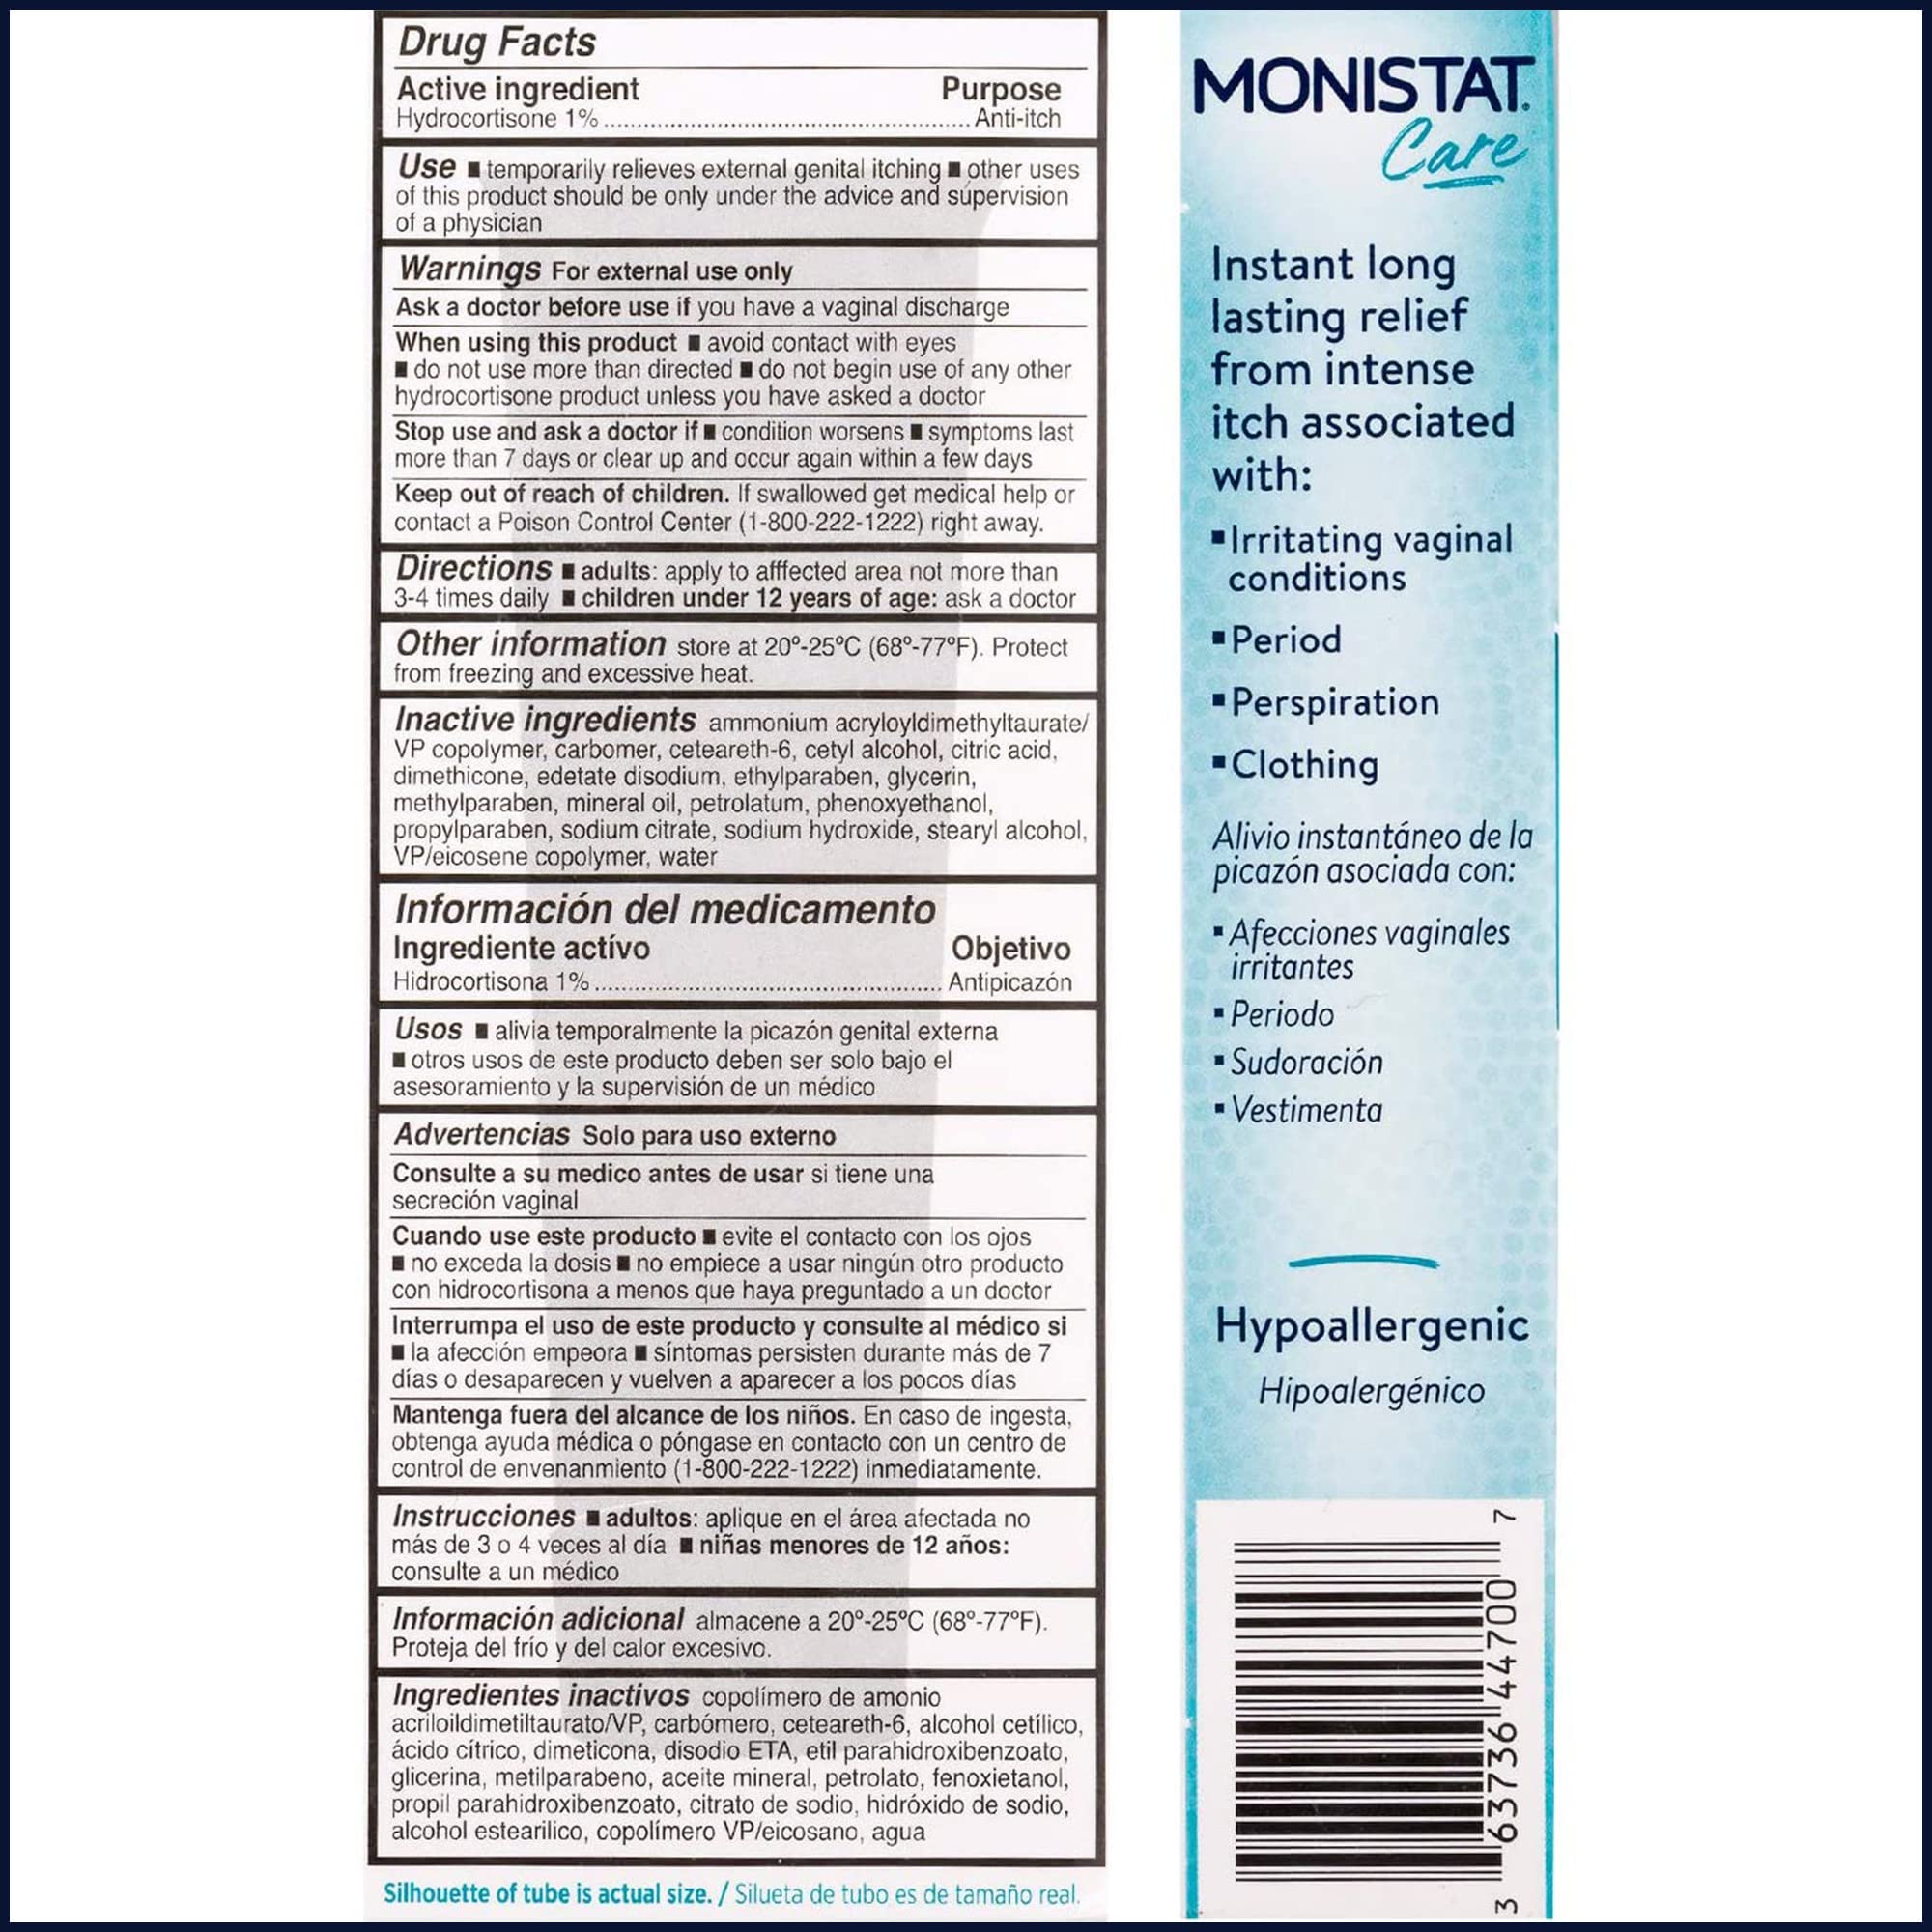 Monistat Care Instant Itch Relief Cream-Max Strength - Cools & Soothes, (Packaging may vary), White, 1 Oz